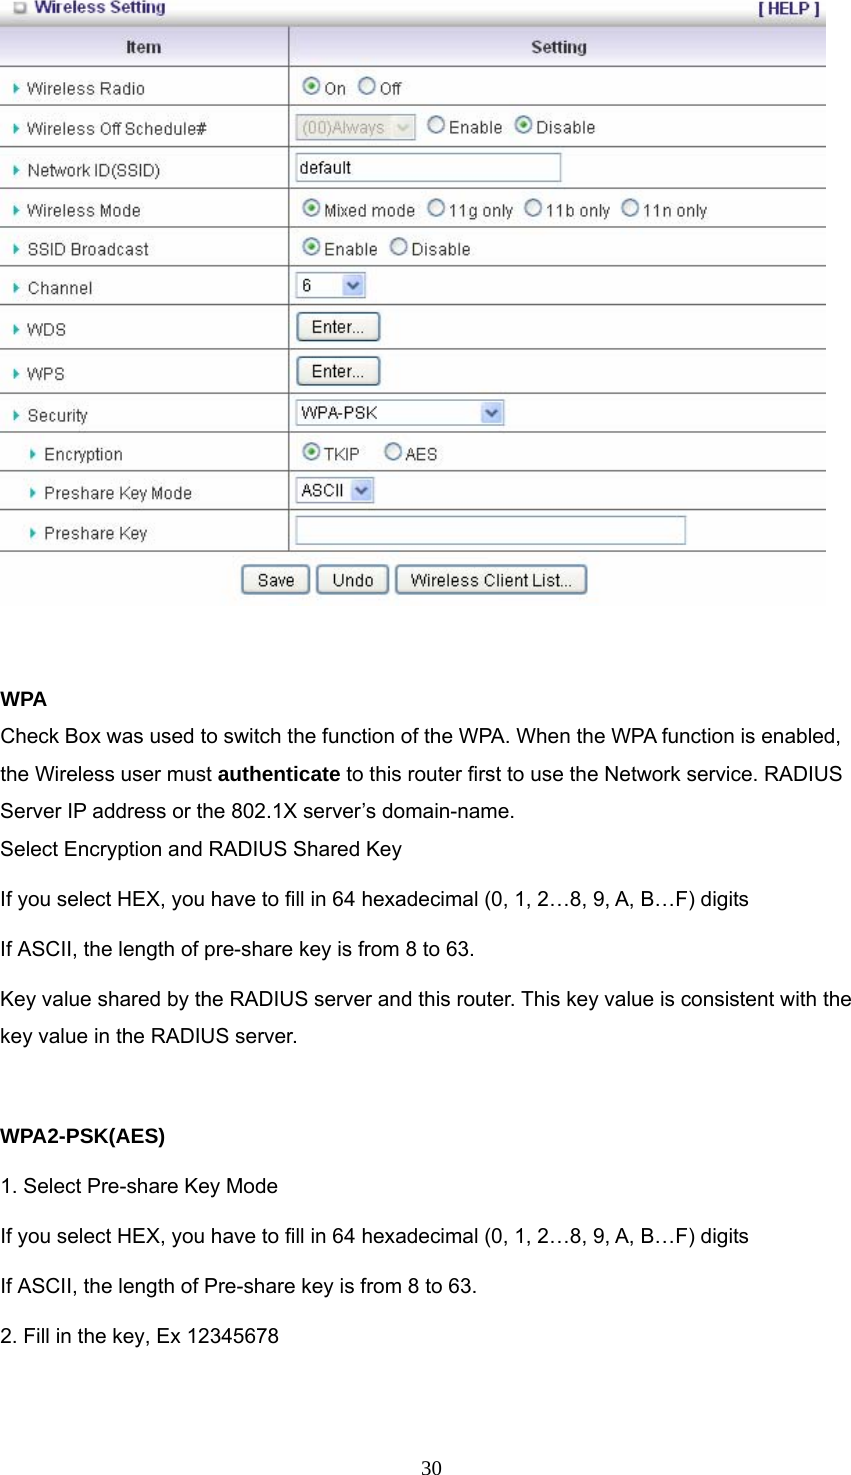  30  WPA Check Box was used to switch the function of the WPA. When the WPA function is enabled, the Wireless user must authenticate to this router first to use the Network service. RADIUS Server IP address or the 802.1X server’s domain-name.   Select Encryption and RADIUS Shared Key If you select HEX, you have to fill in 64 hexadecimal (0, 1, 2…8, 9, A, B…F) digits If ASCII, the length of pre-share key is from 8 to 63. Key value shared by the RADIUS server and this router. This key value is consistent with the key value in the RADIUS server.  WPA2-PSK(AES) 1. Select Pre-share Key Mode If you select HEX, you have to fill in 64 hexadecimal (0, 1, 2…8, 9, A, B…F) digits If ASCII, the length of Pre-share key is from 8 to 63. 2. Fill in the key, Ex 12345678  